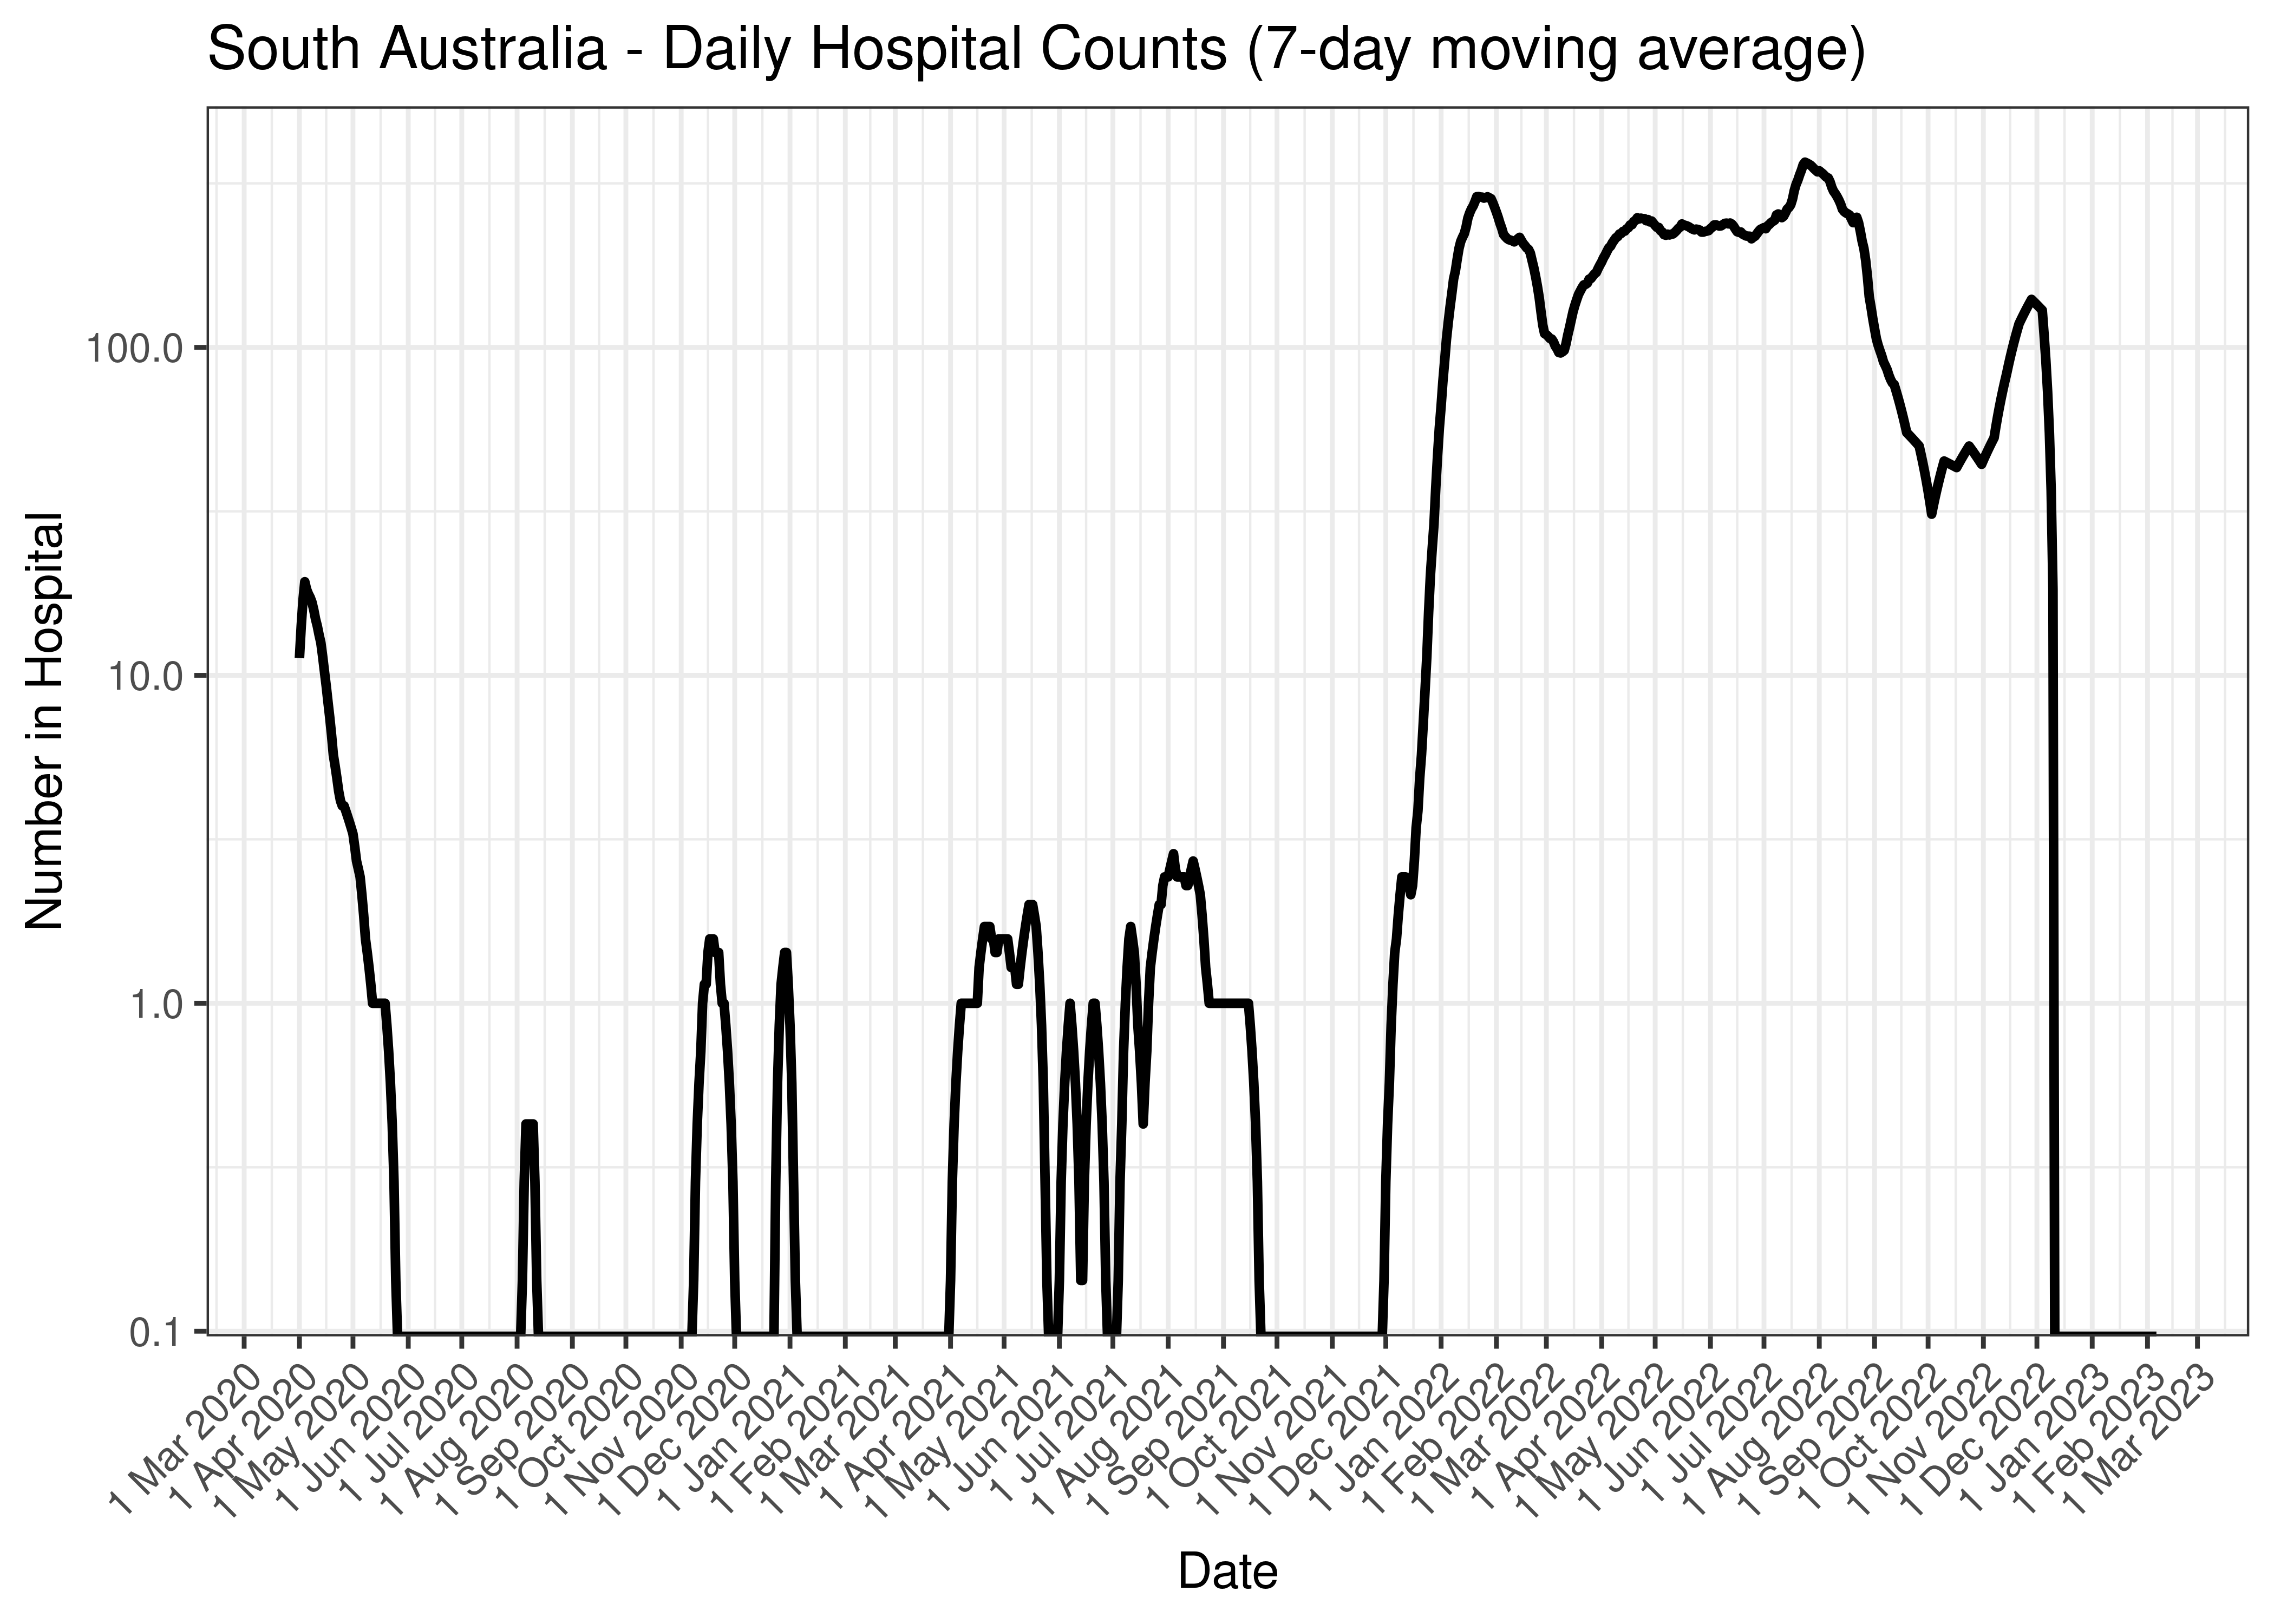 South Australia - Daily Hospital Counts (7-day moving average)